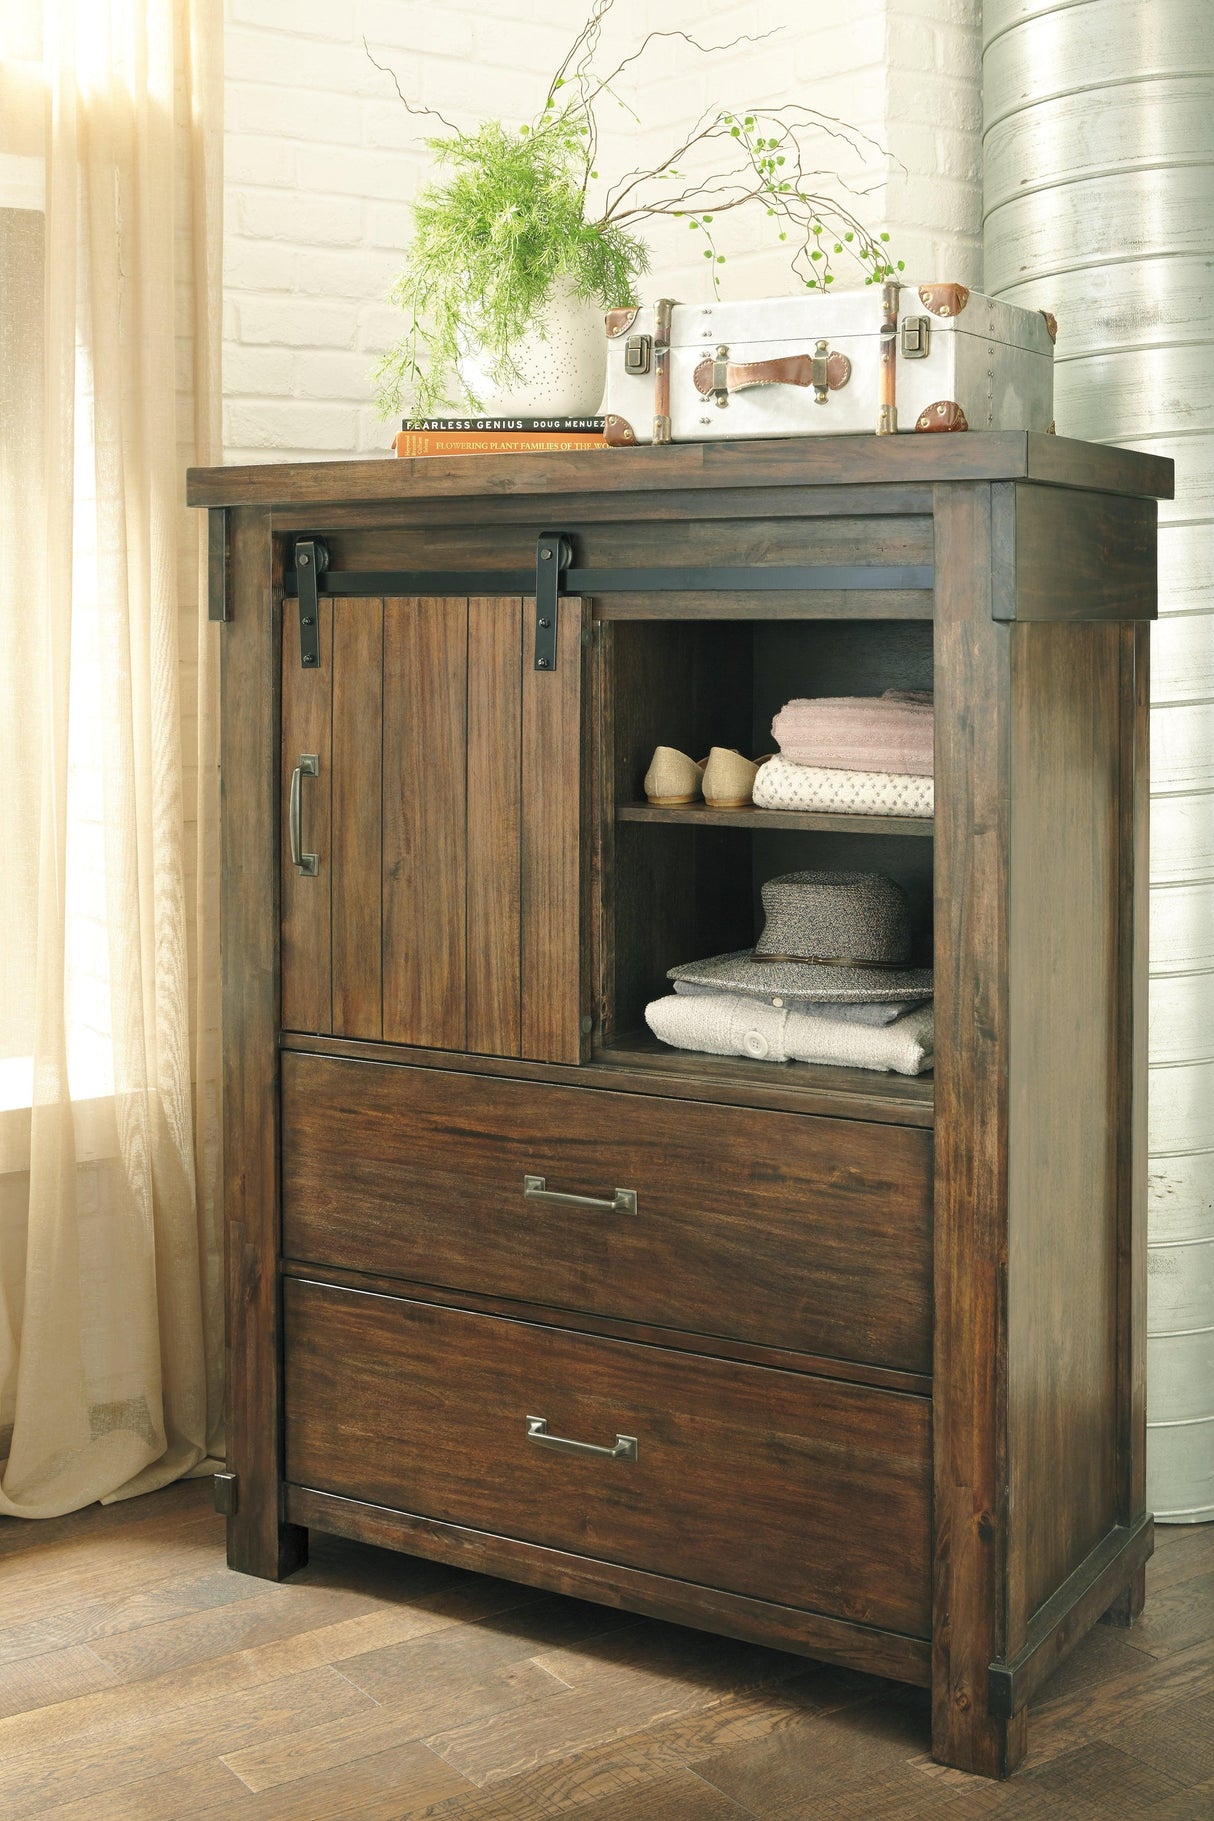 Lakeleigh Brown Chest Of Drawers - Ella Furniture